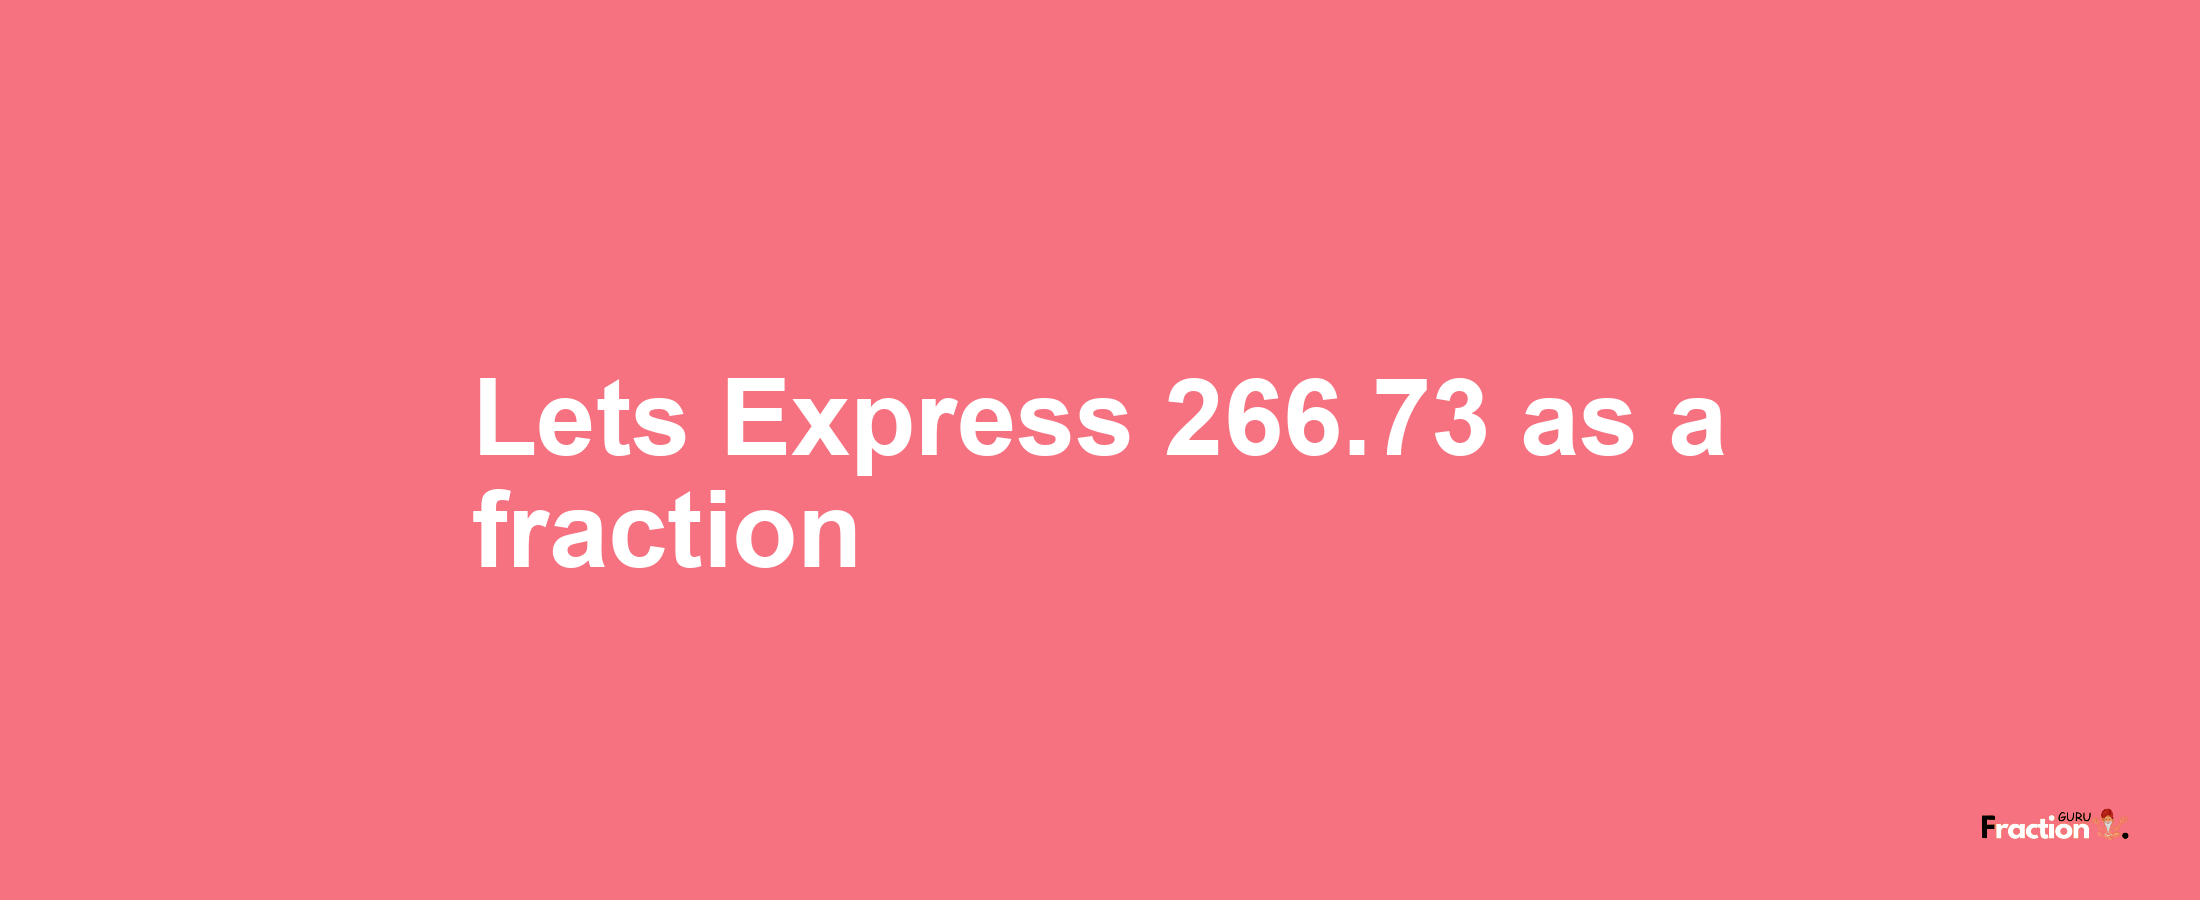 Lets Express 266.73 as afraction